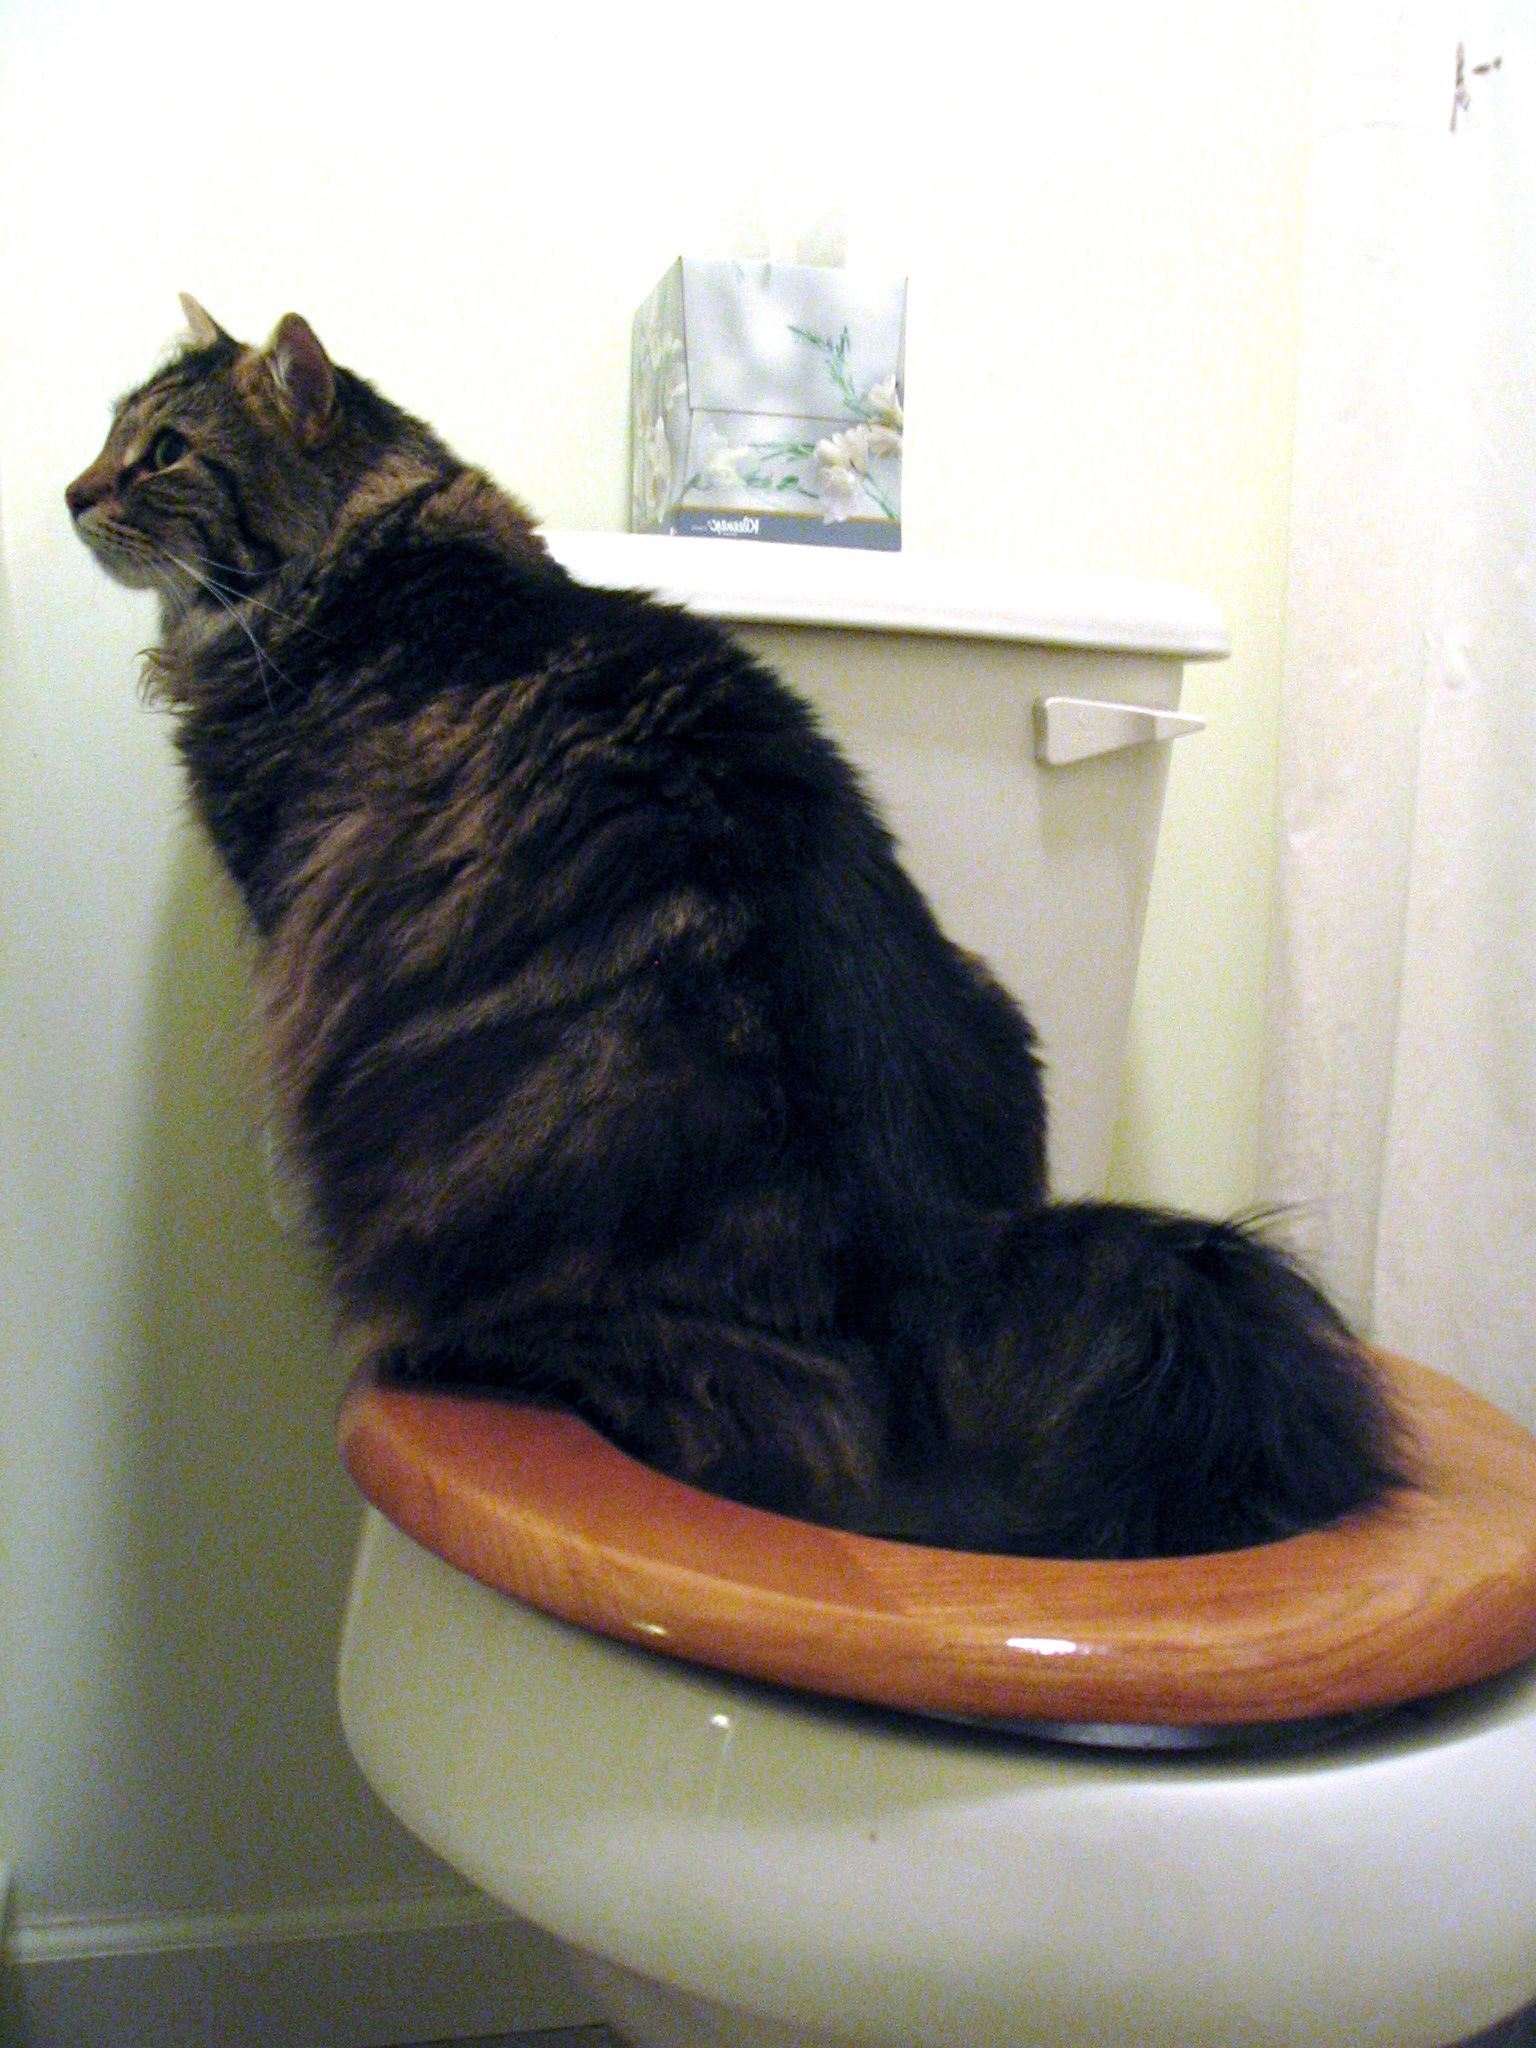 Cat Owners Ditch Kitty Litter and Turn to the Toilet to Save Money